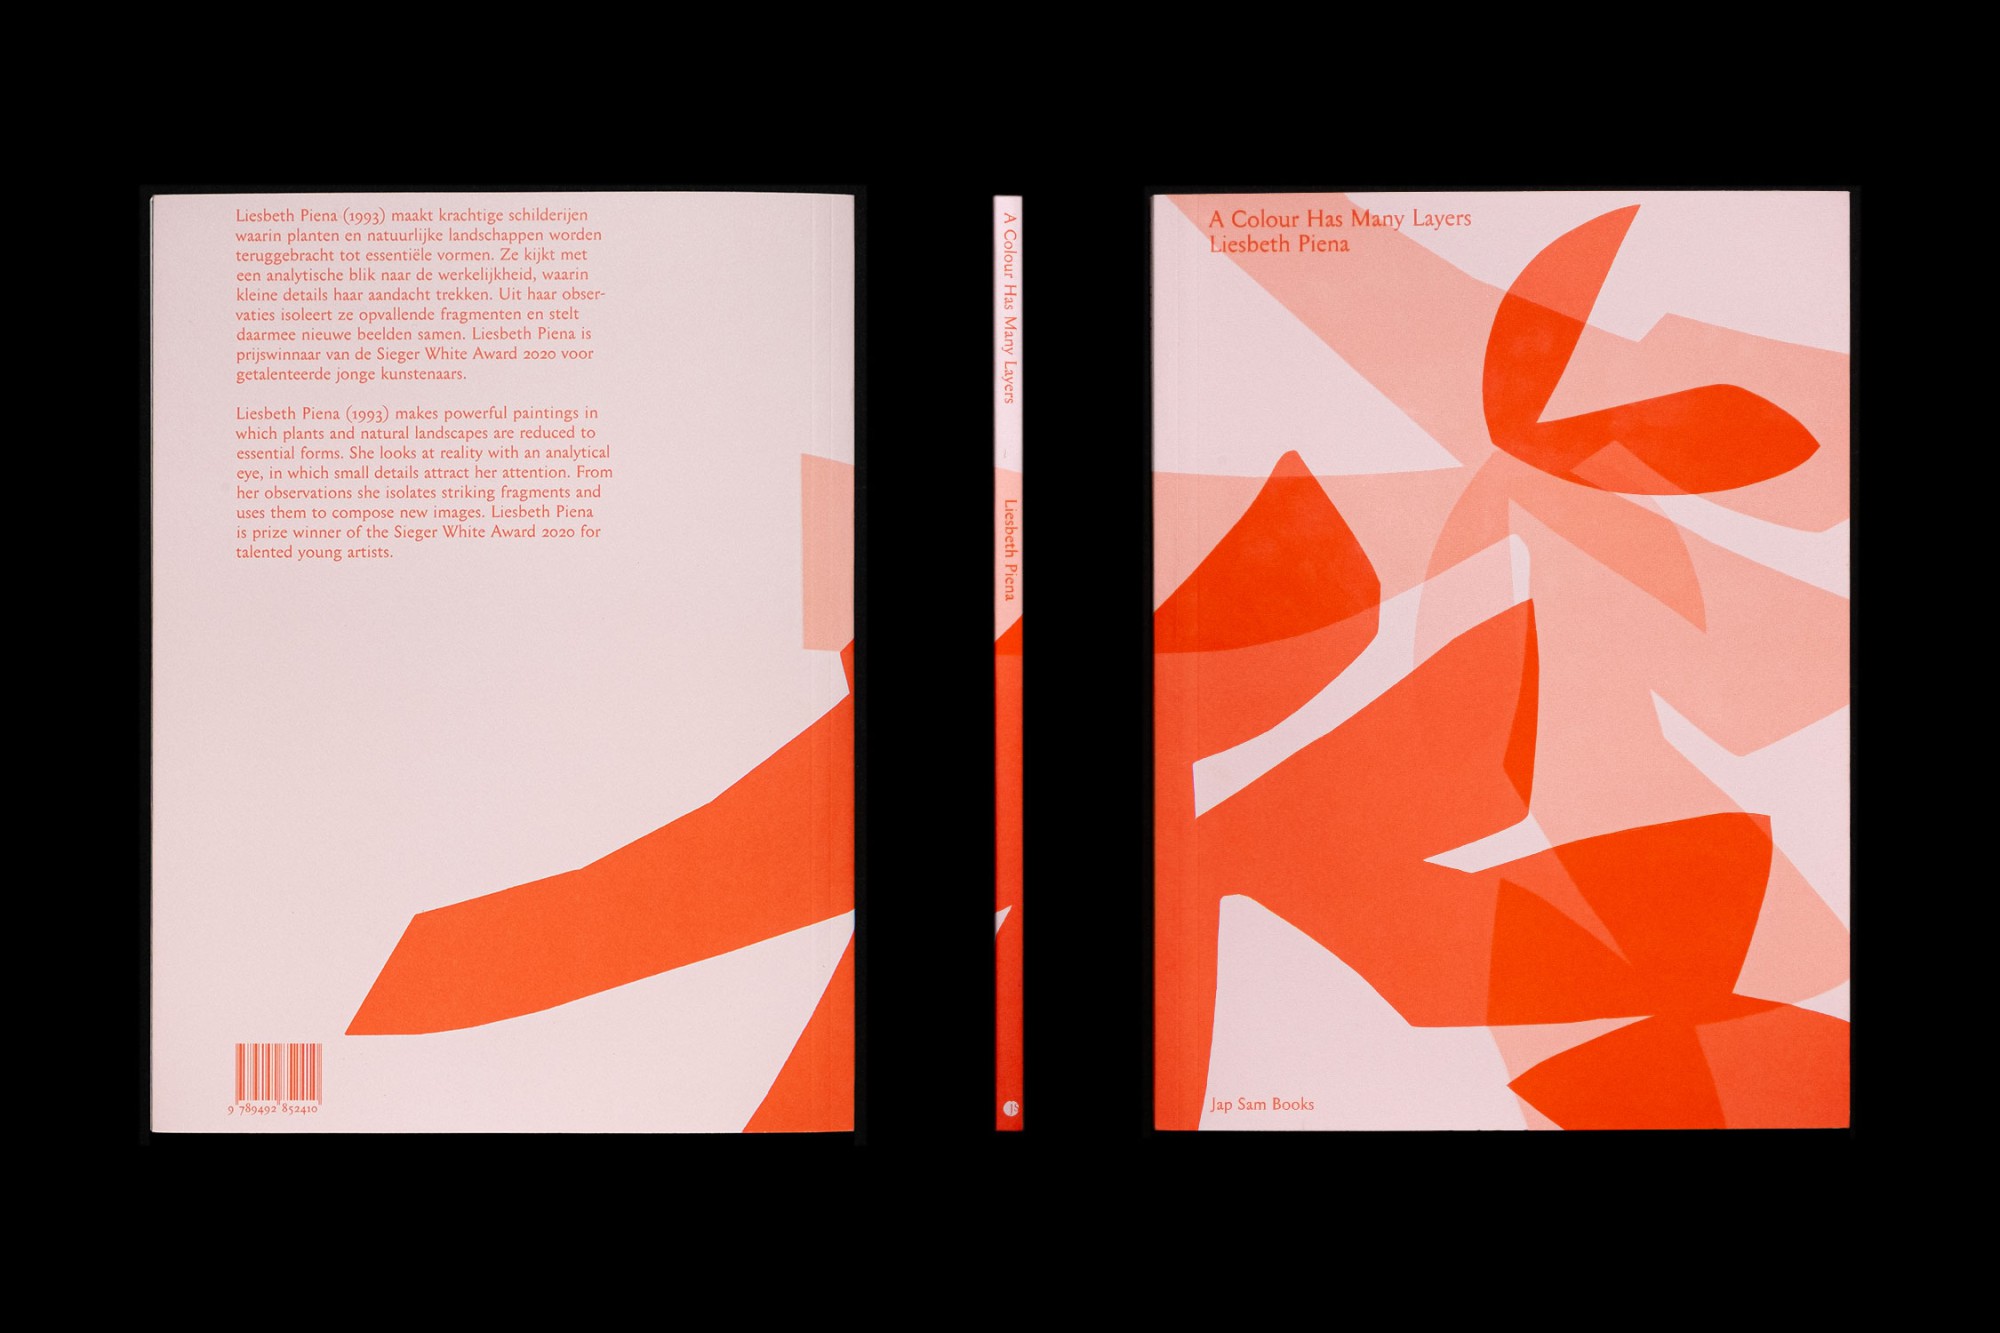 back, spine and front cover of the book 'A Colour Has Many Layers' by Liesbeth Piena